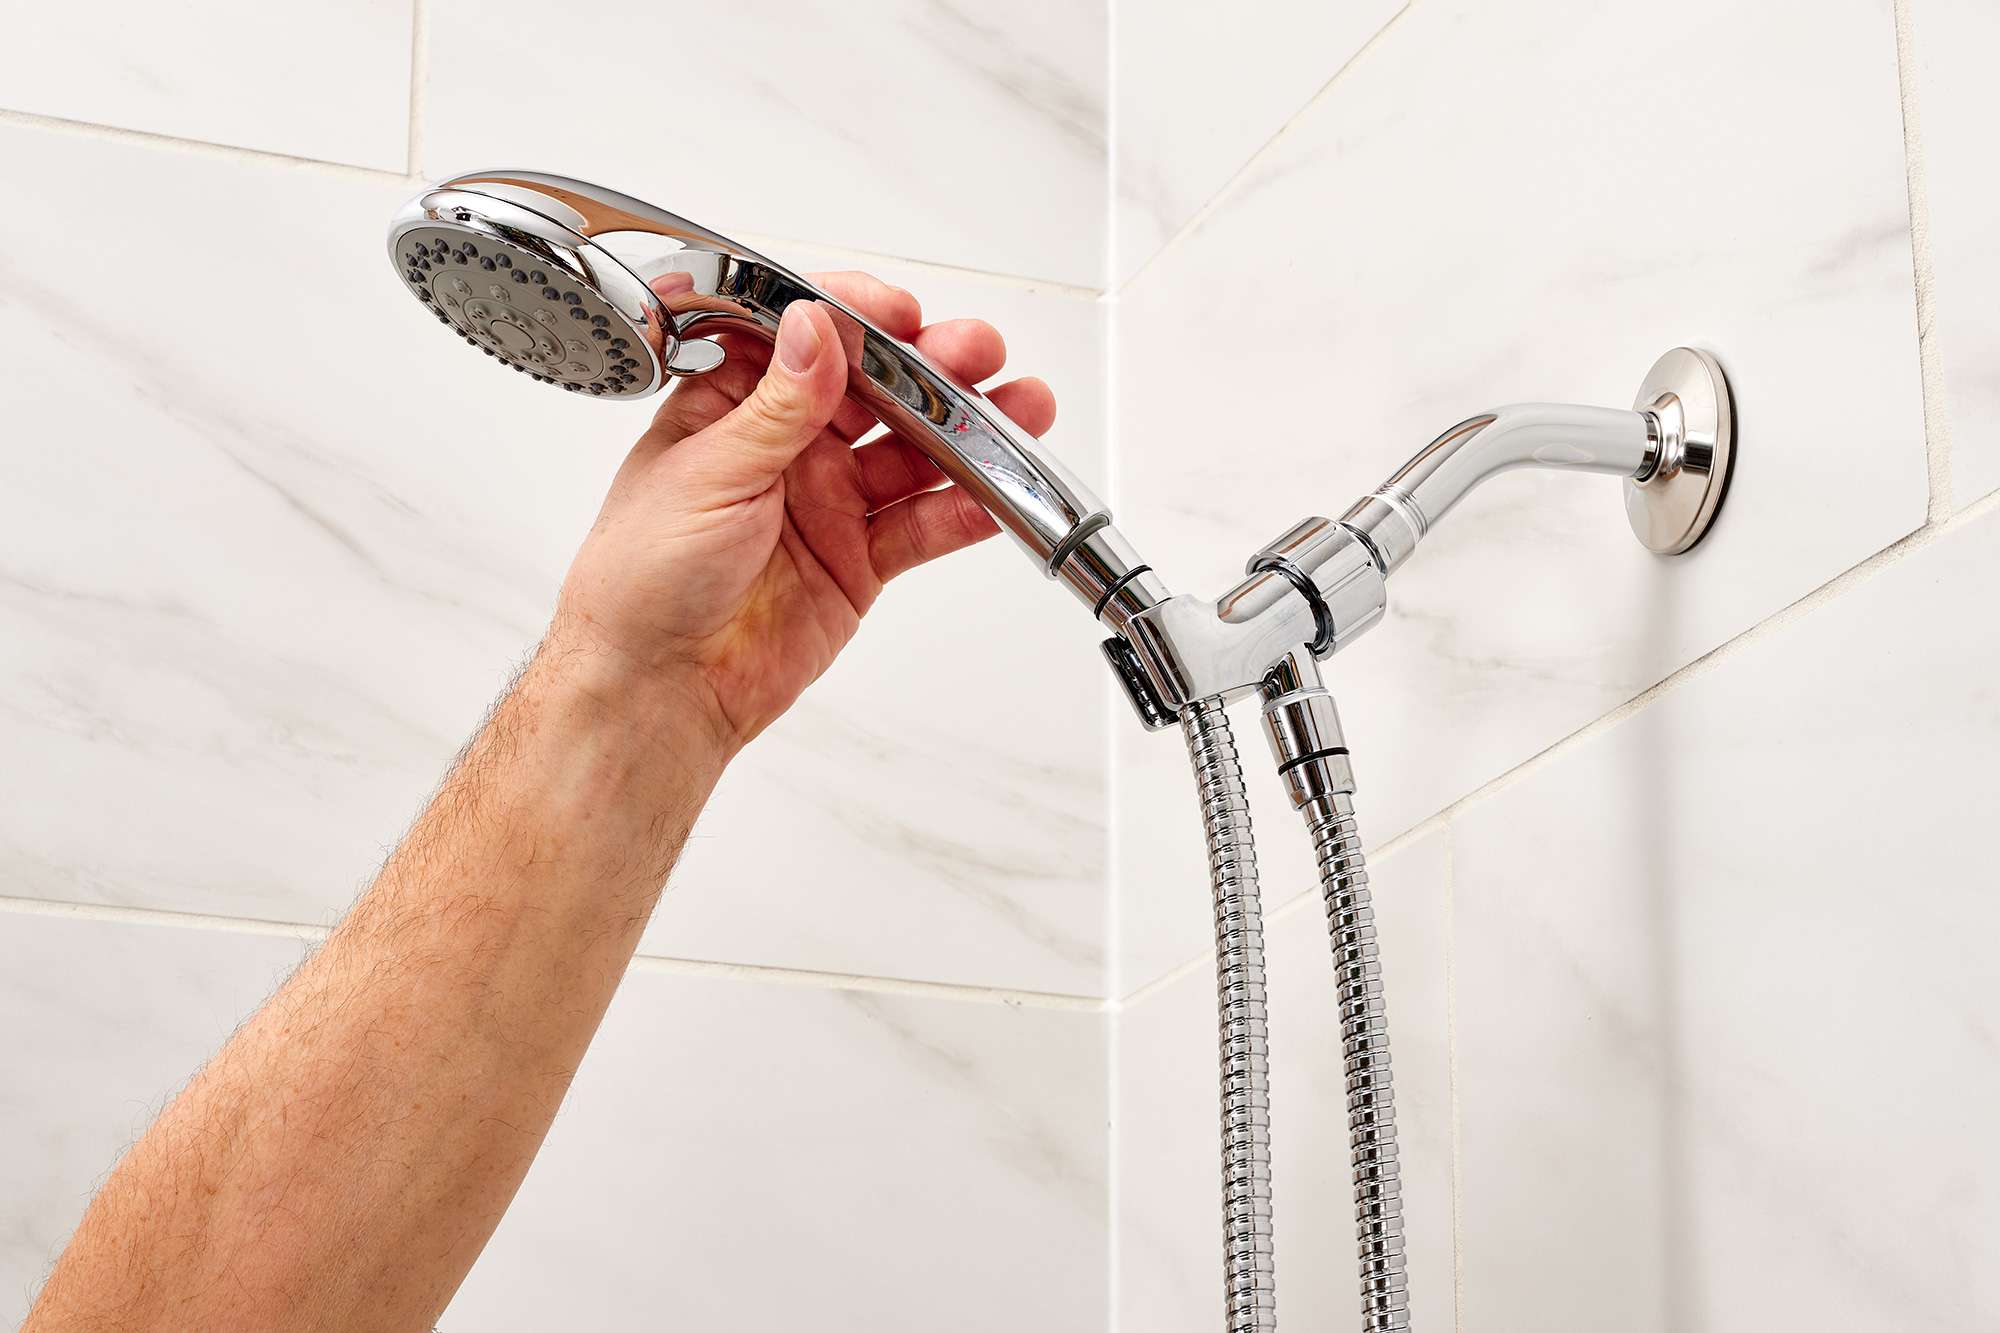 How To Install Over Head Shower Head With Separate Handheld Head